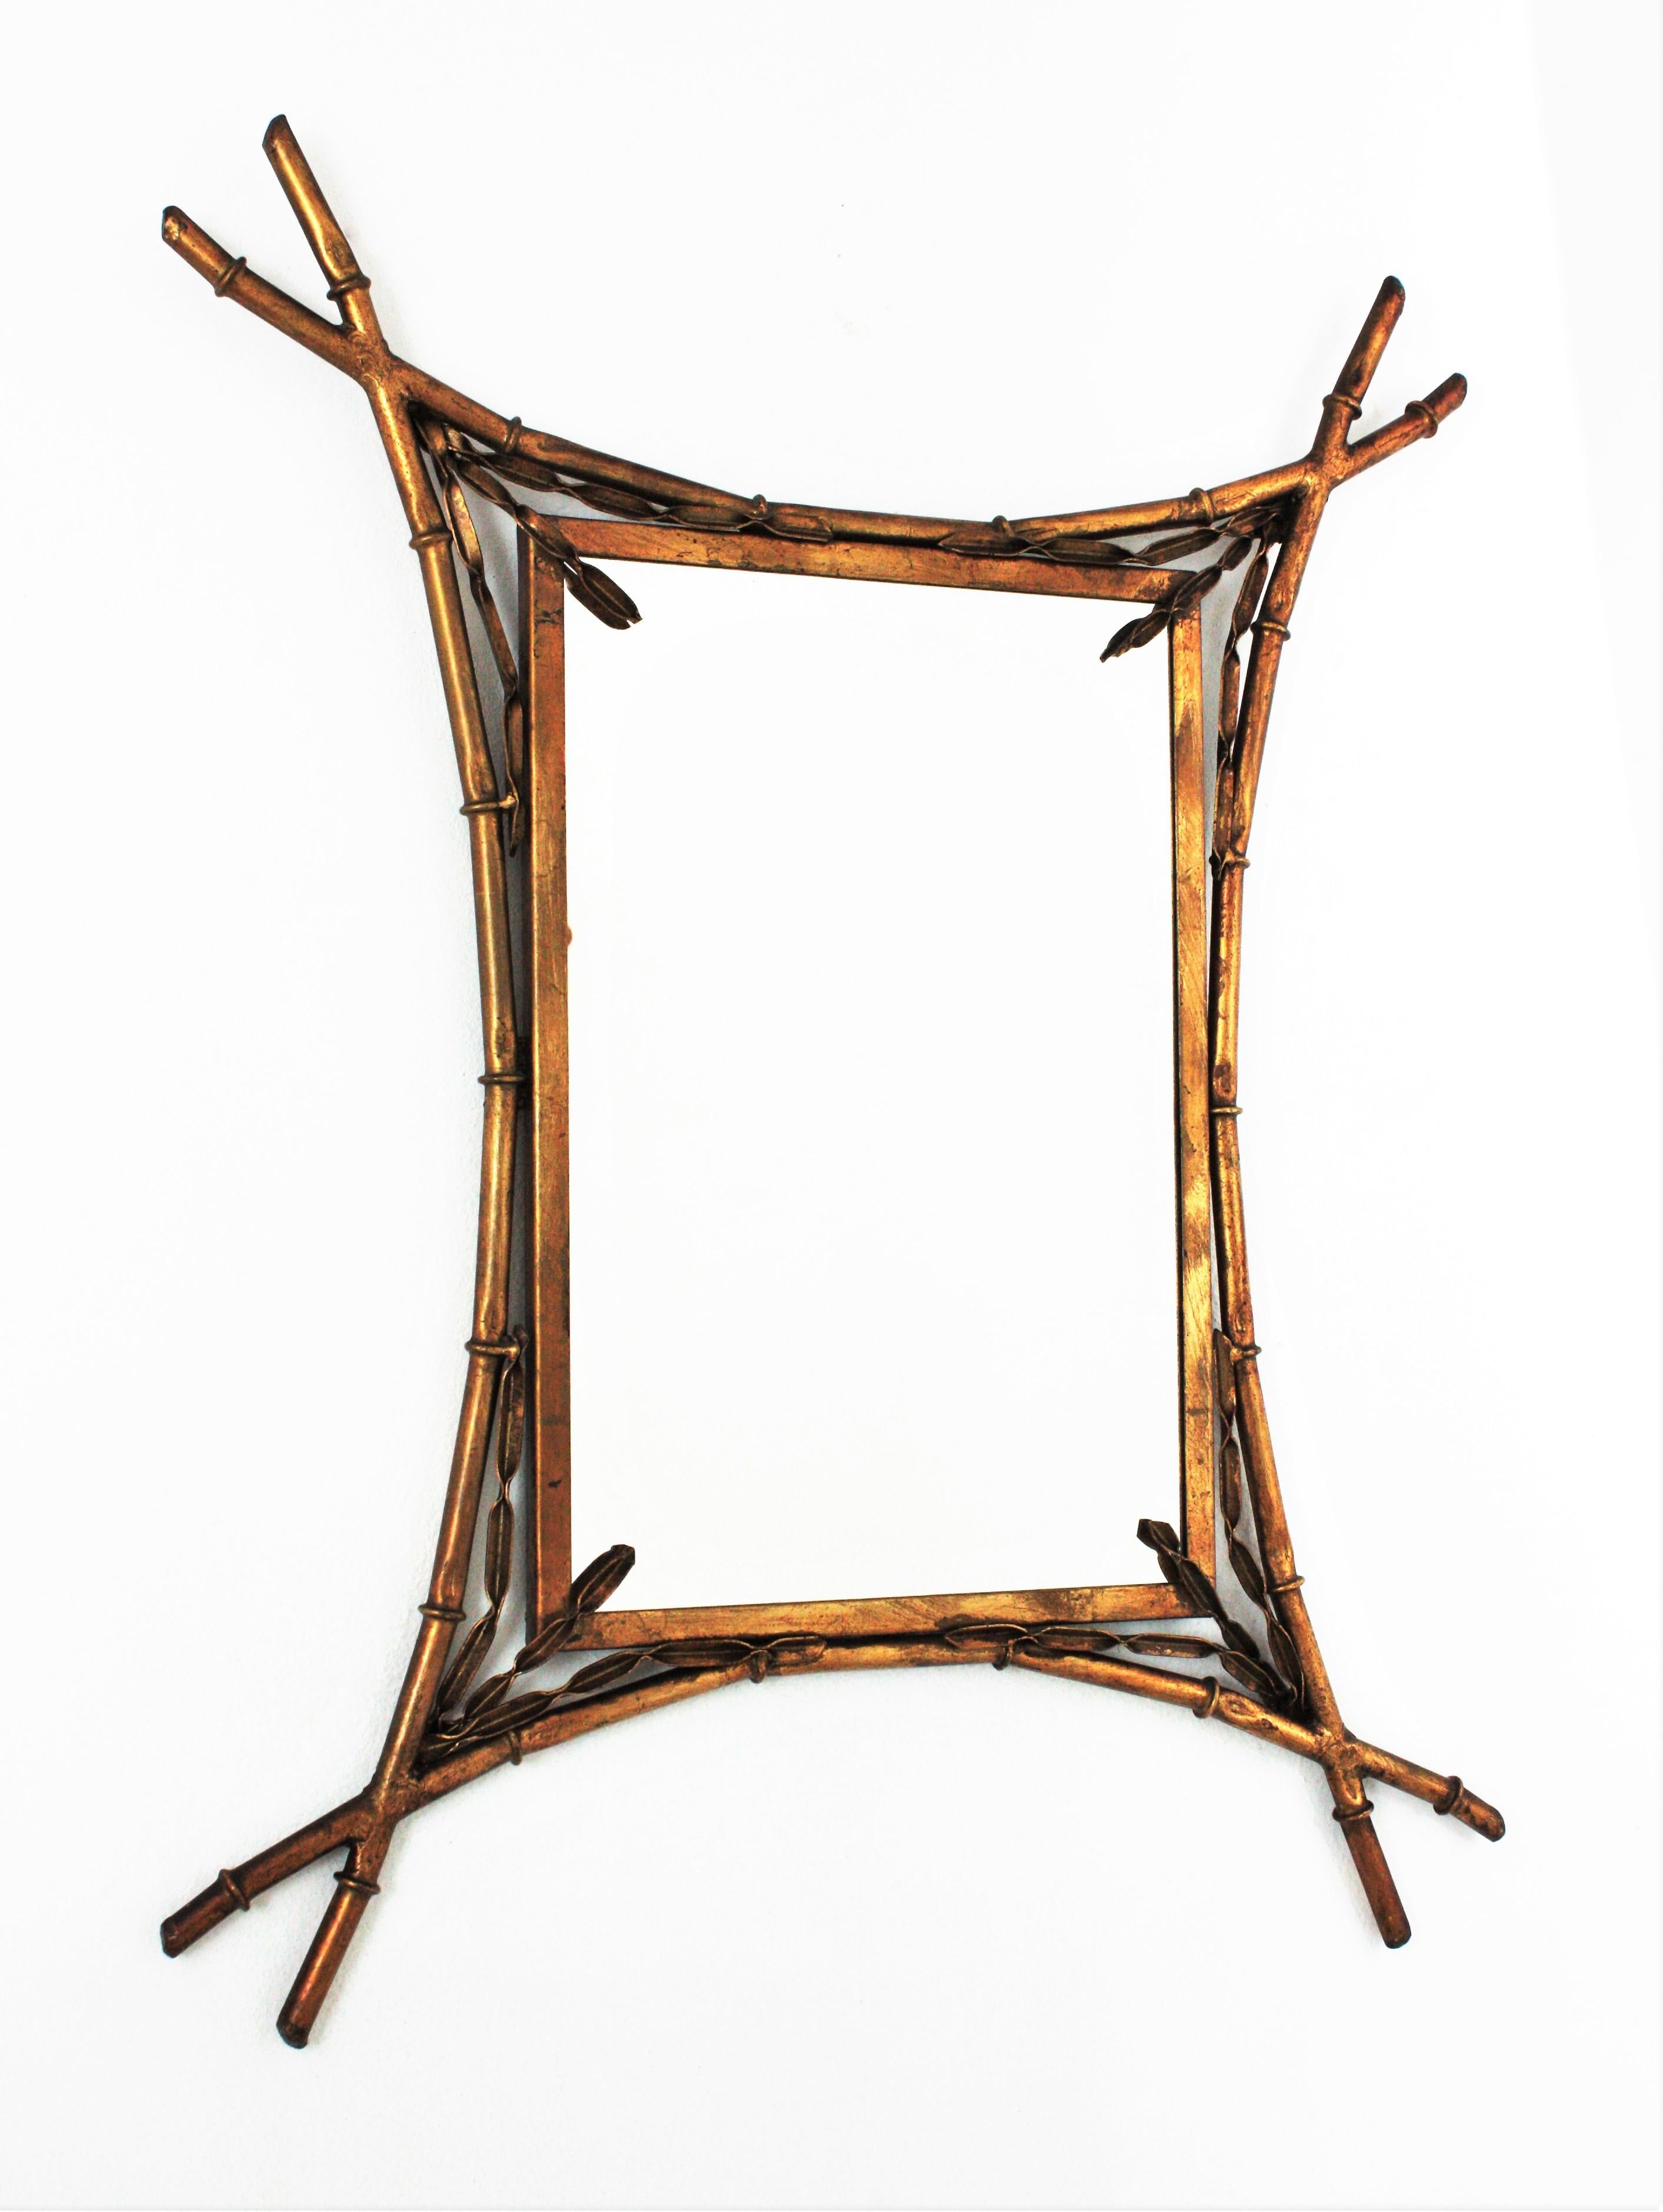 Eye-catching faux bamboo rectangular mirror with leaf motifs. France, 1930s.
The frame has an elegant design with curved faux bamboo gilt iron canes and foliage motifs adorning the corners.
handcrafted in gilt wrought iron.
This wall mirror will be